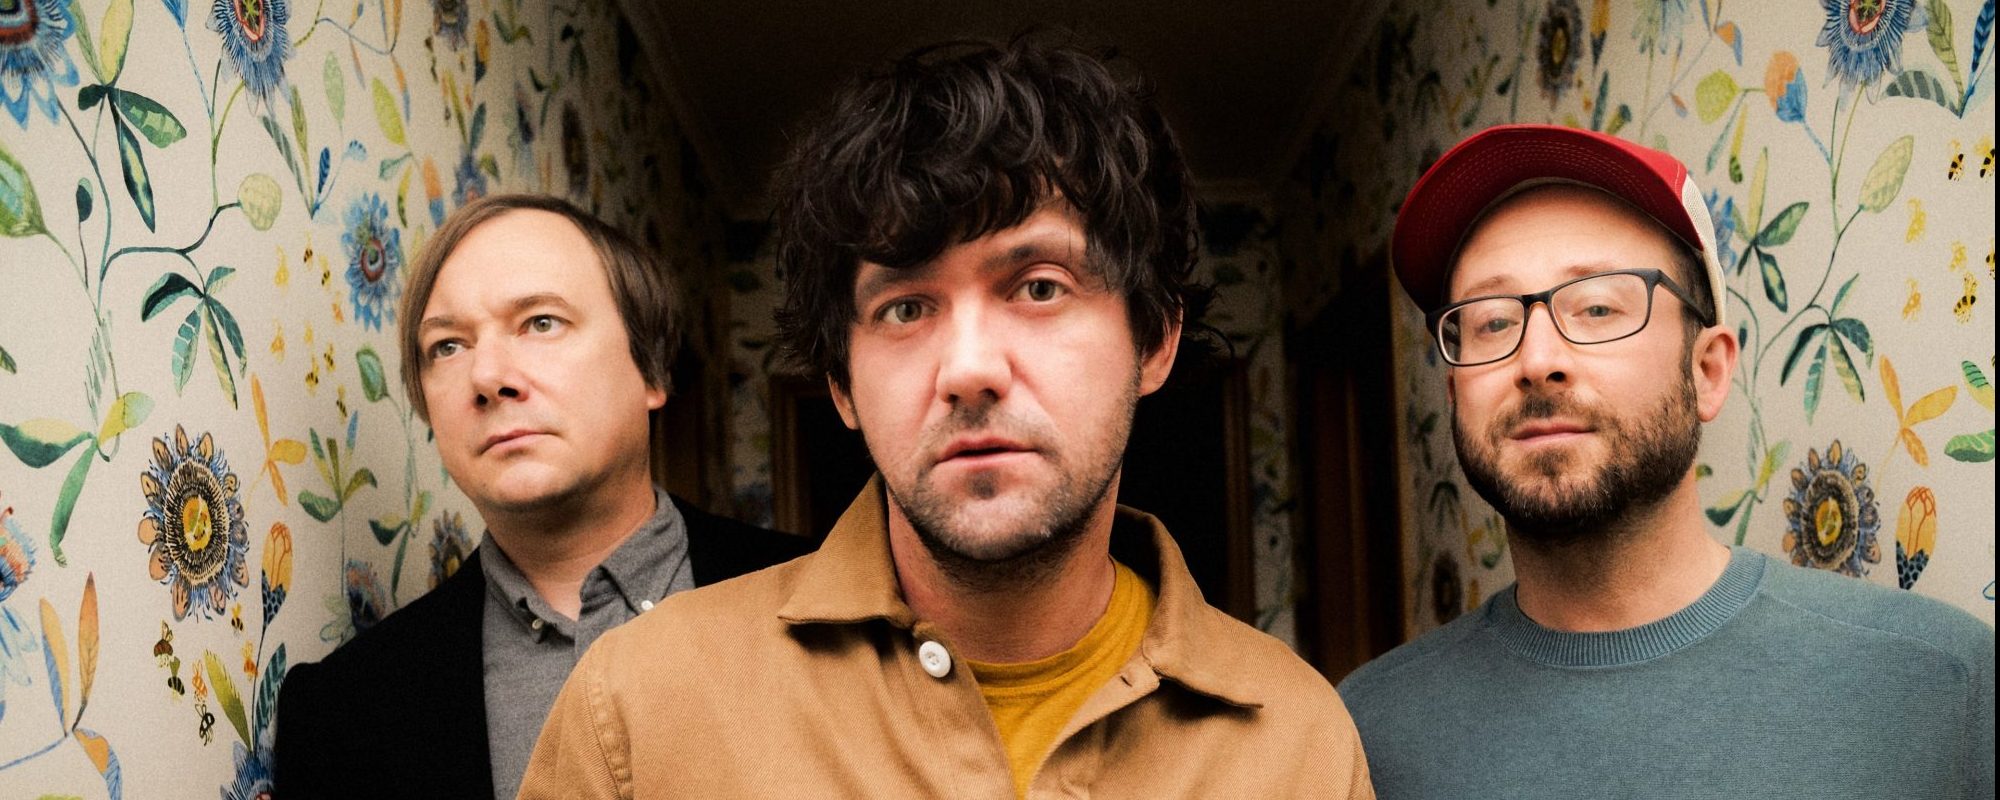 Bright Eyes Seek Reprieve on “Forced Convalescence”